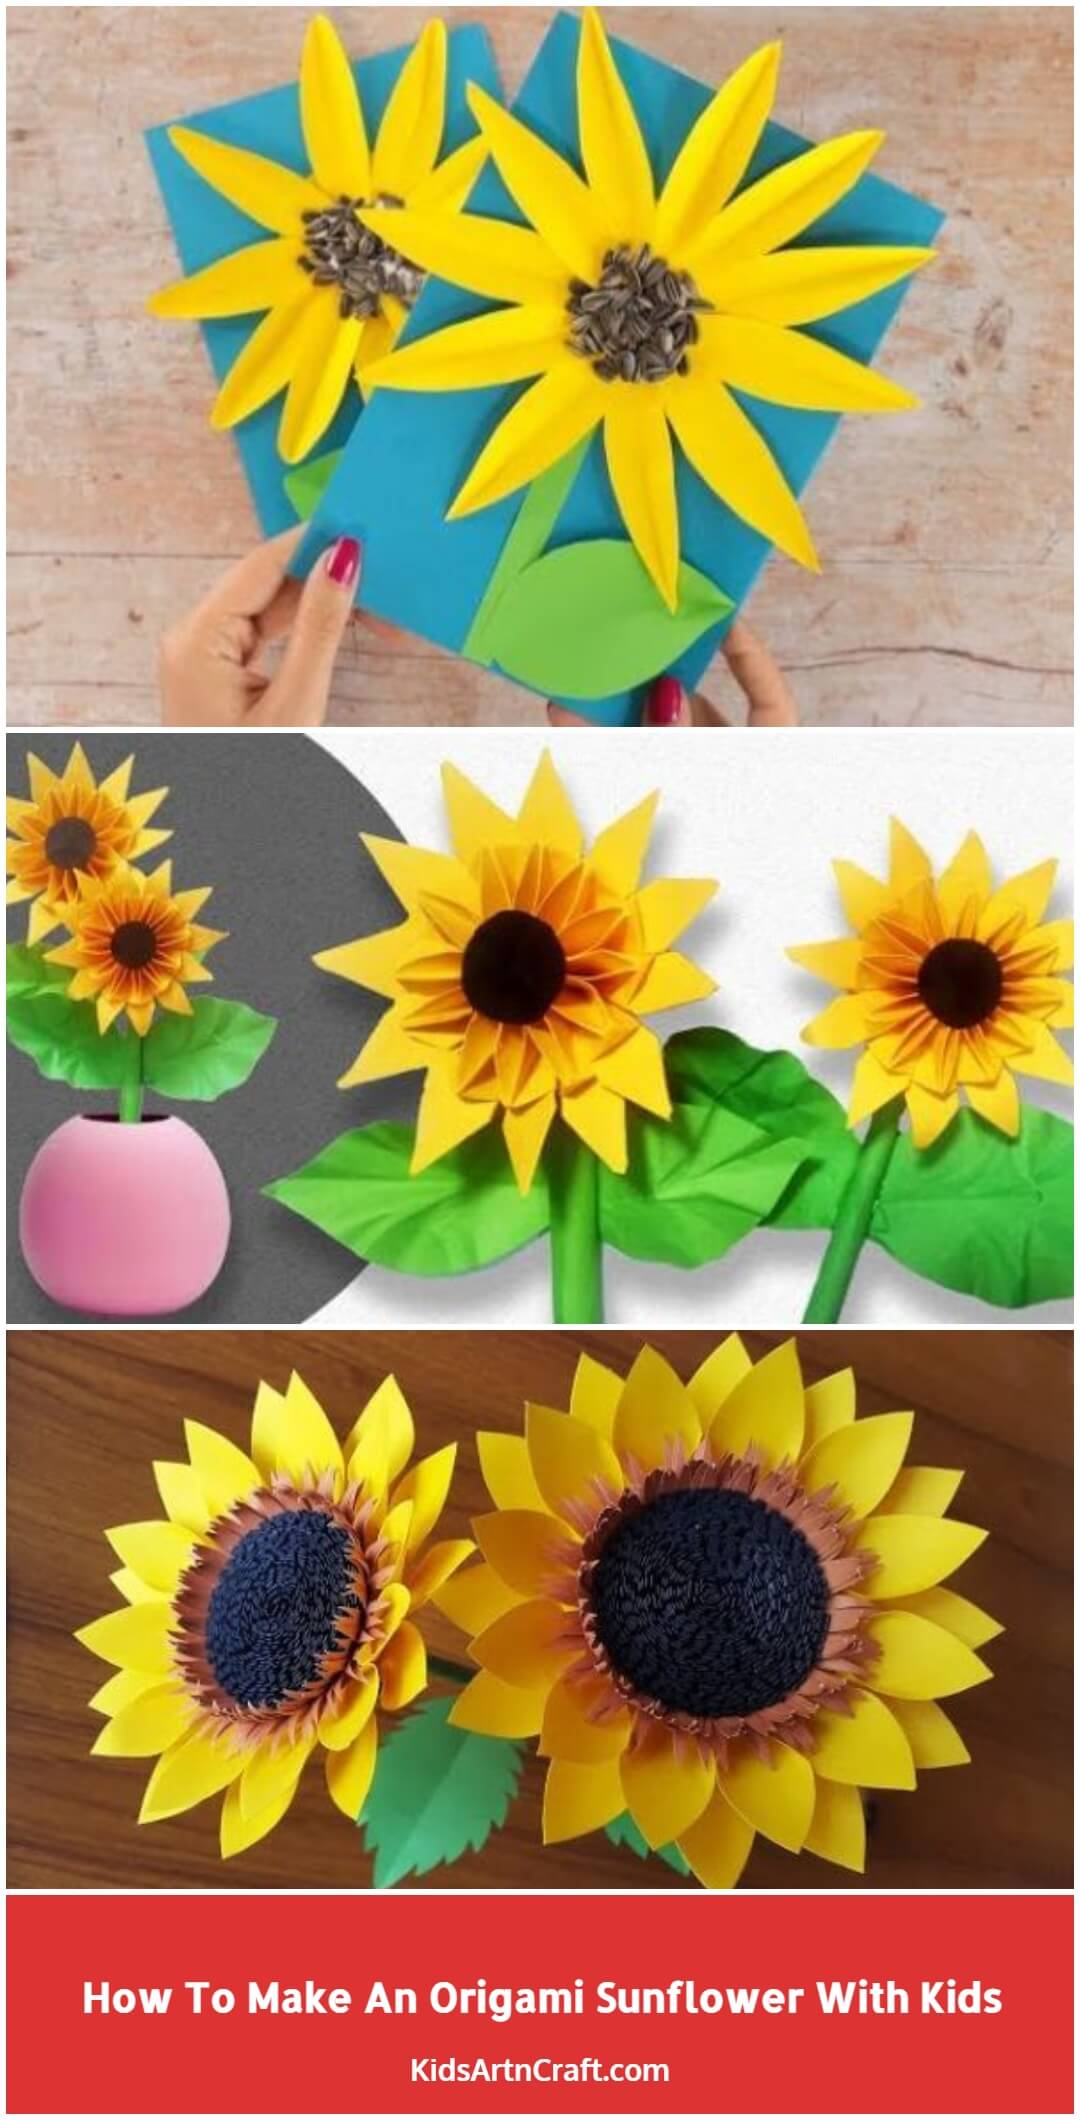 How To Make An Origami Sunflower With Kids